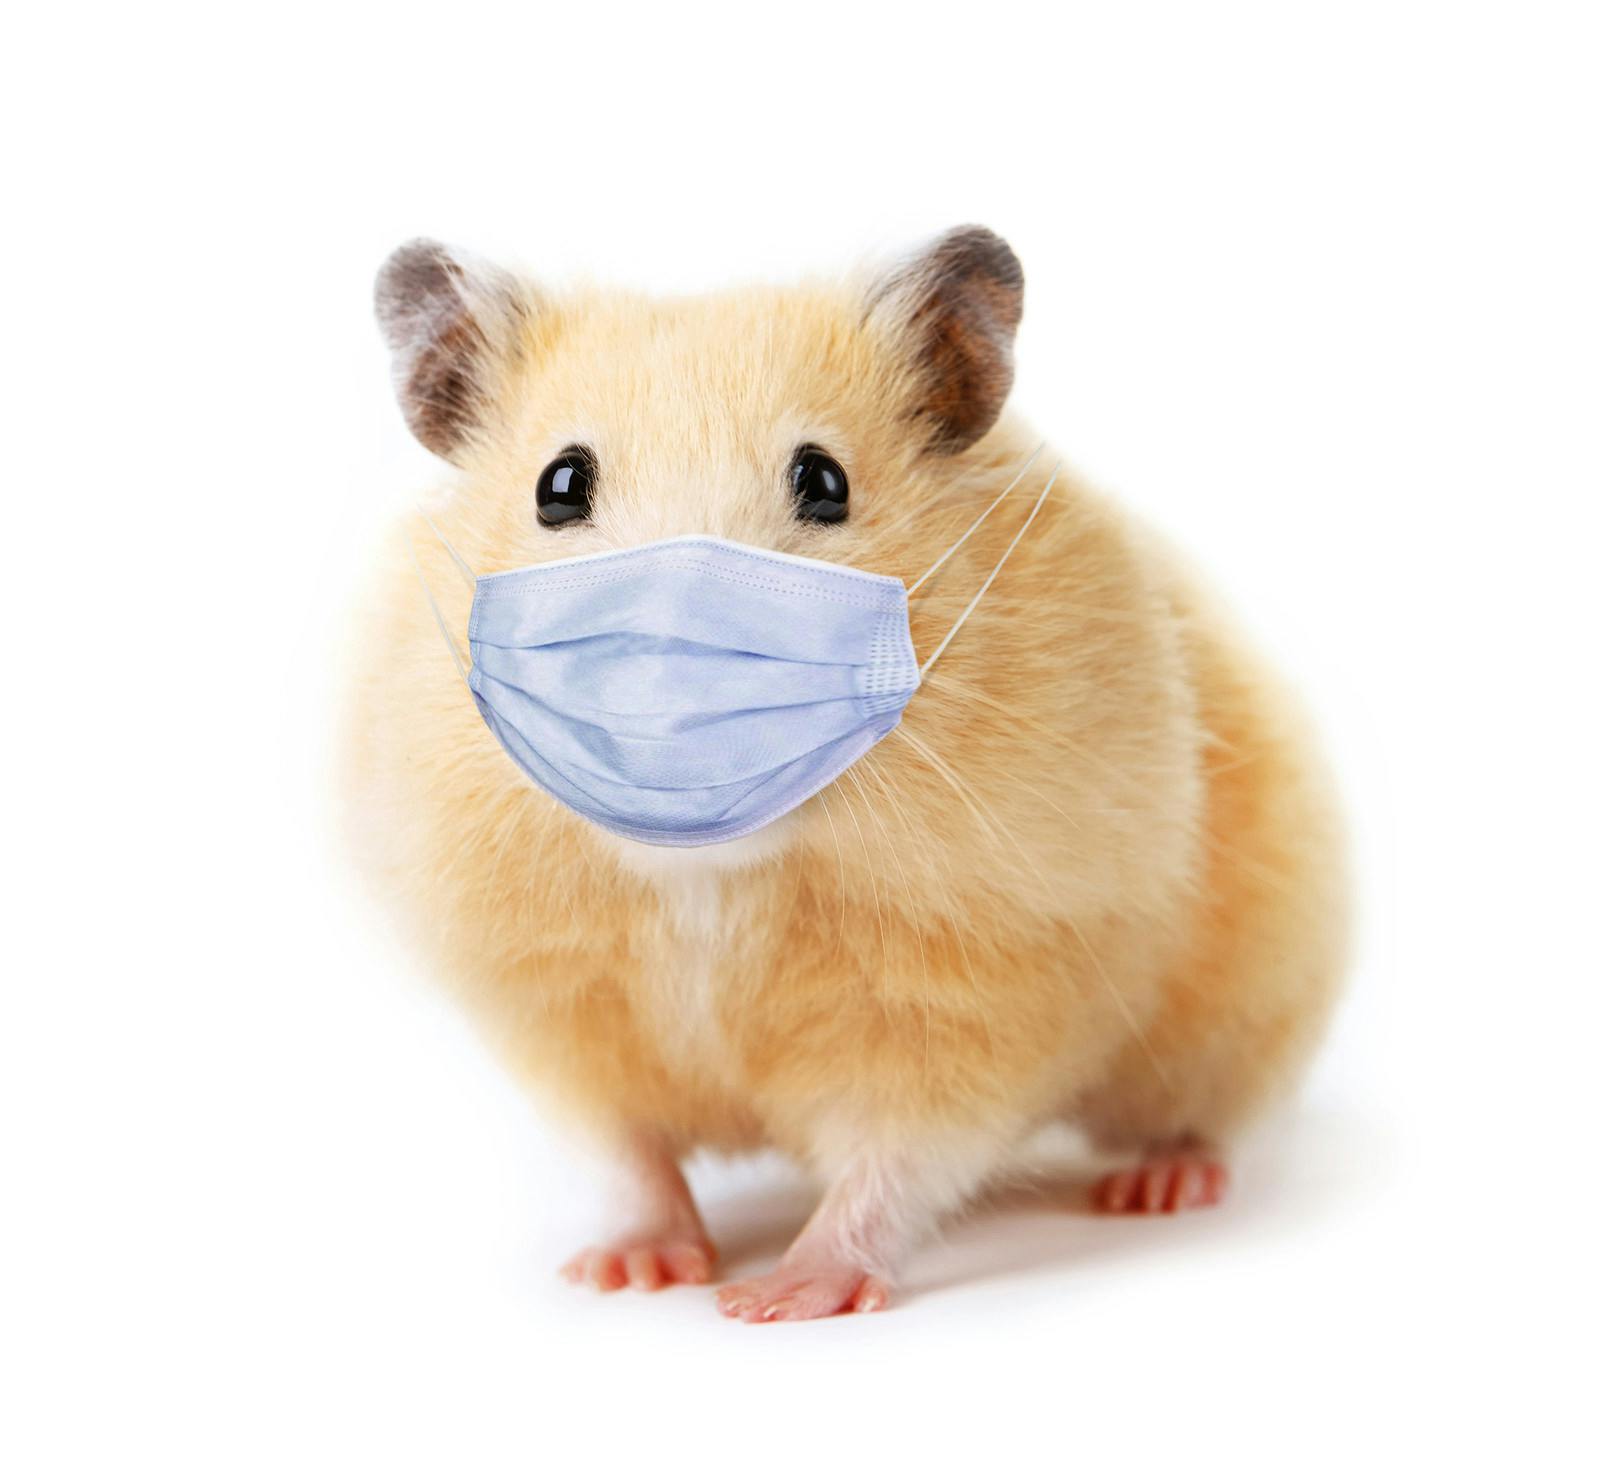 Little funny hamster in medical mask isolated on white background
